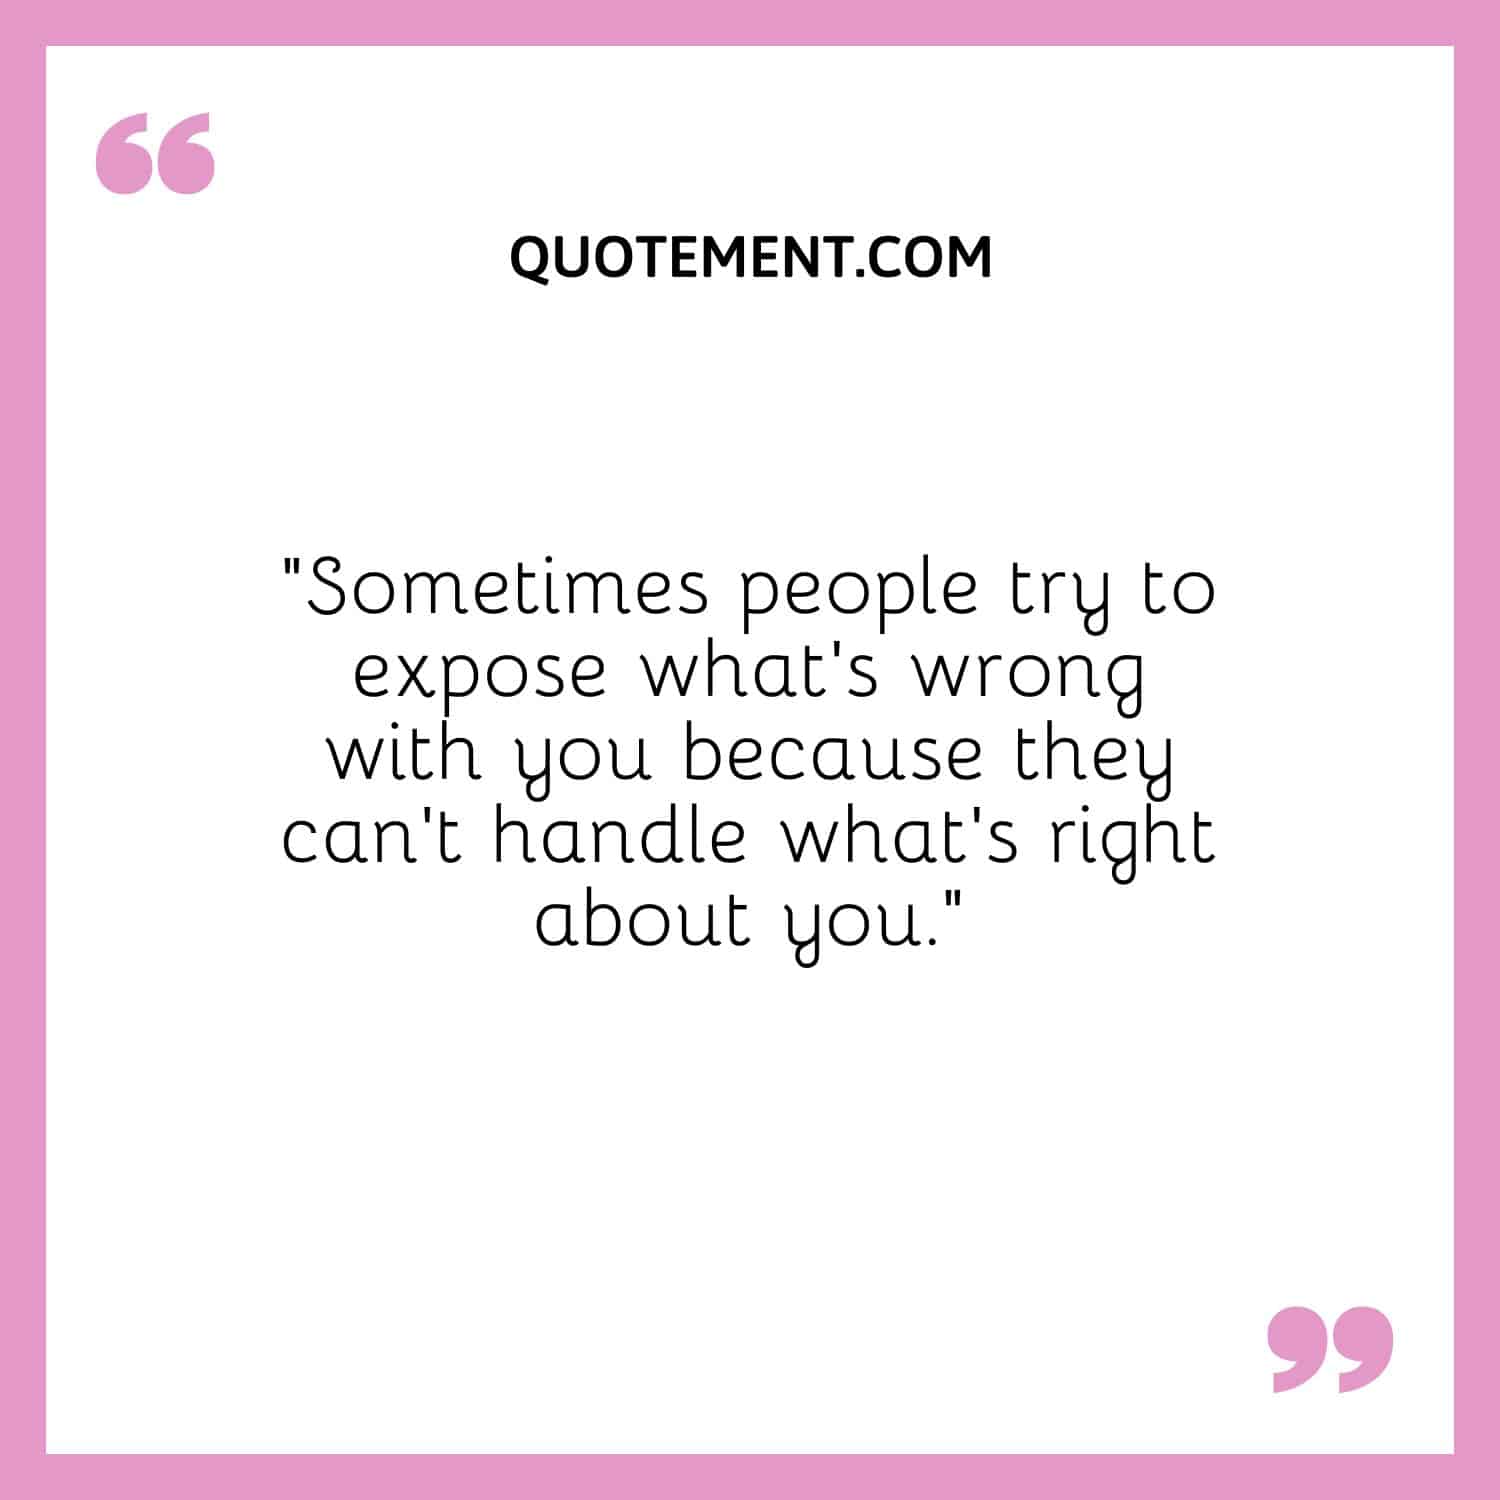 “Sometimes people try to expose what’s wrong with you because they can’t handle what’s right about you.”